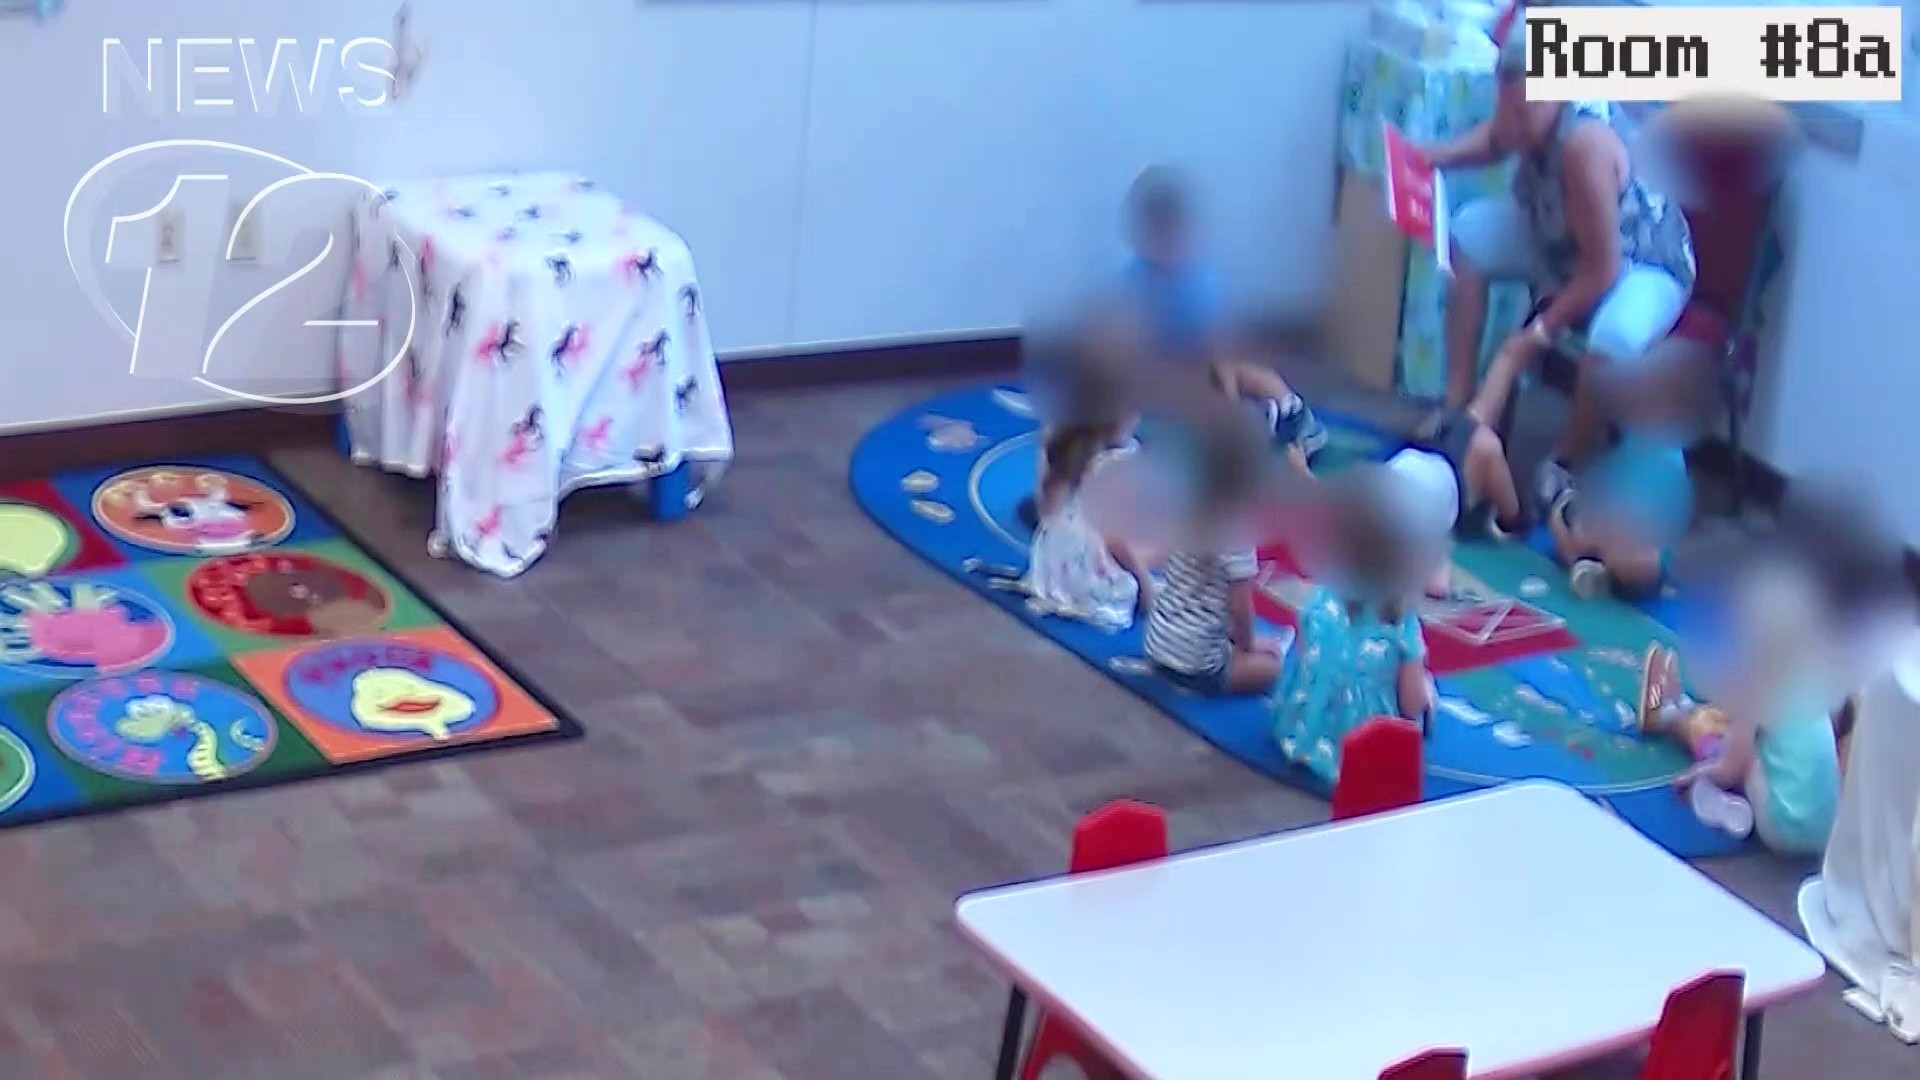 Brooks Applications Spanking - First from News 12: See video that sparked mom's attack on day-care teacher